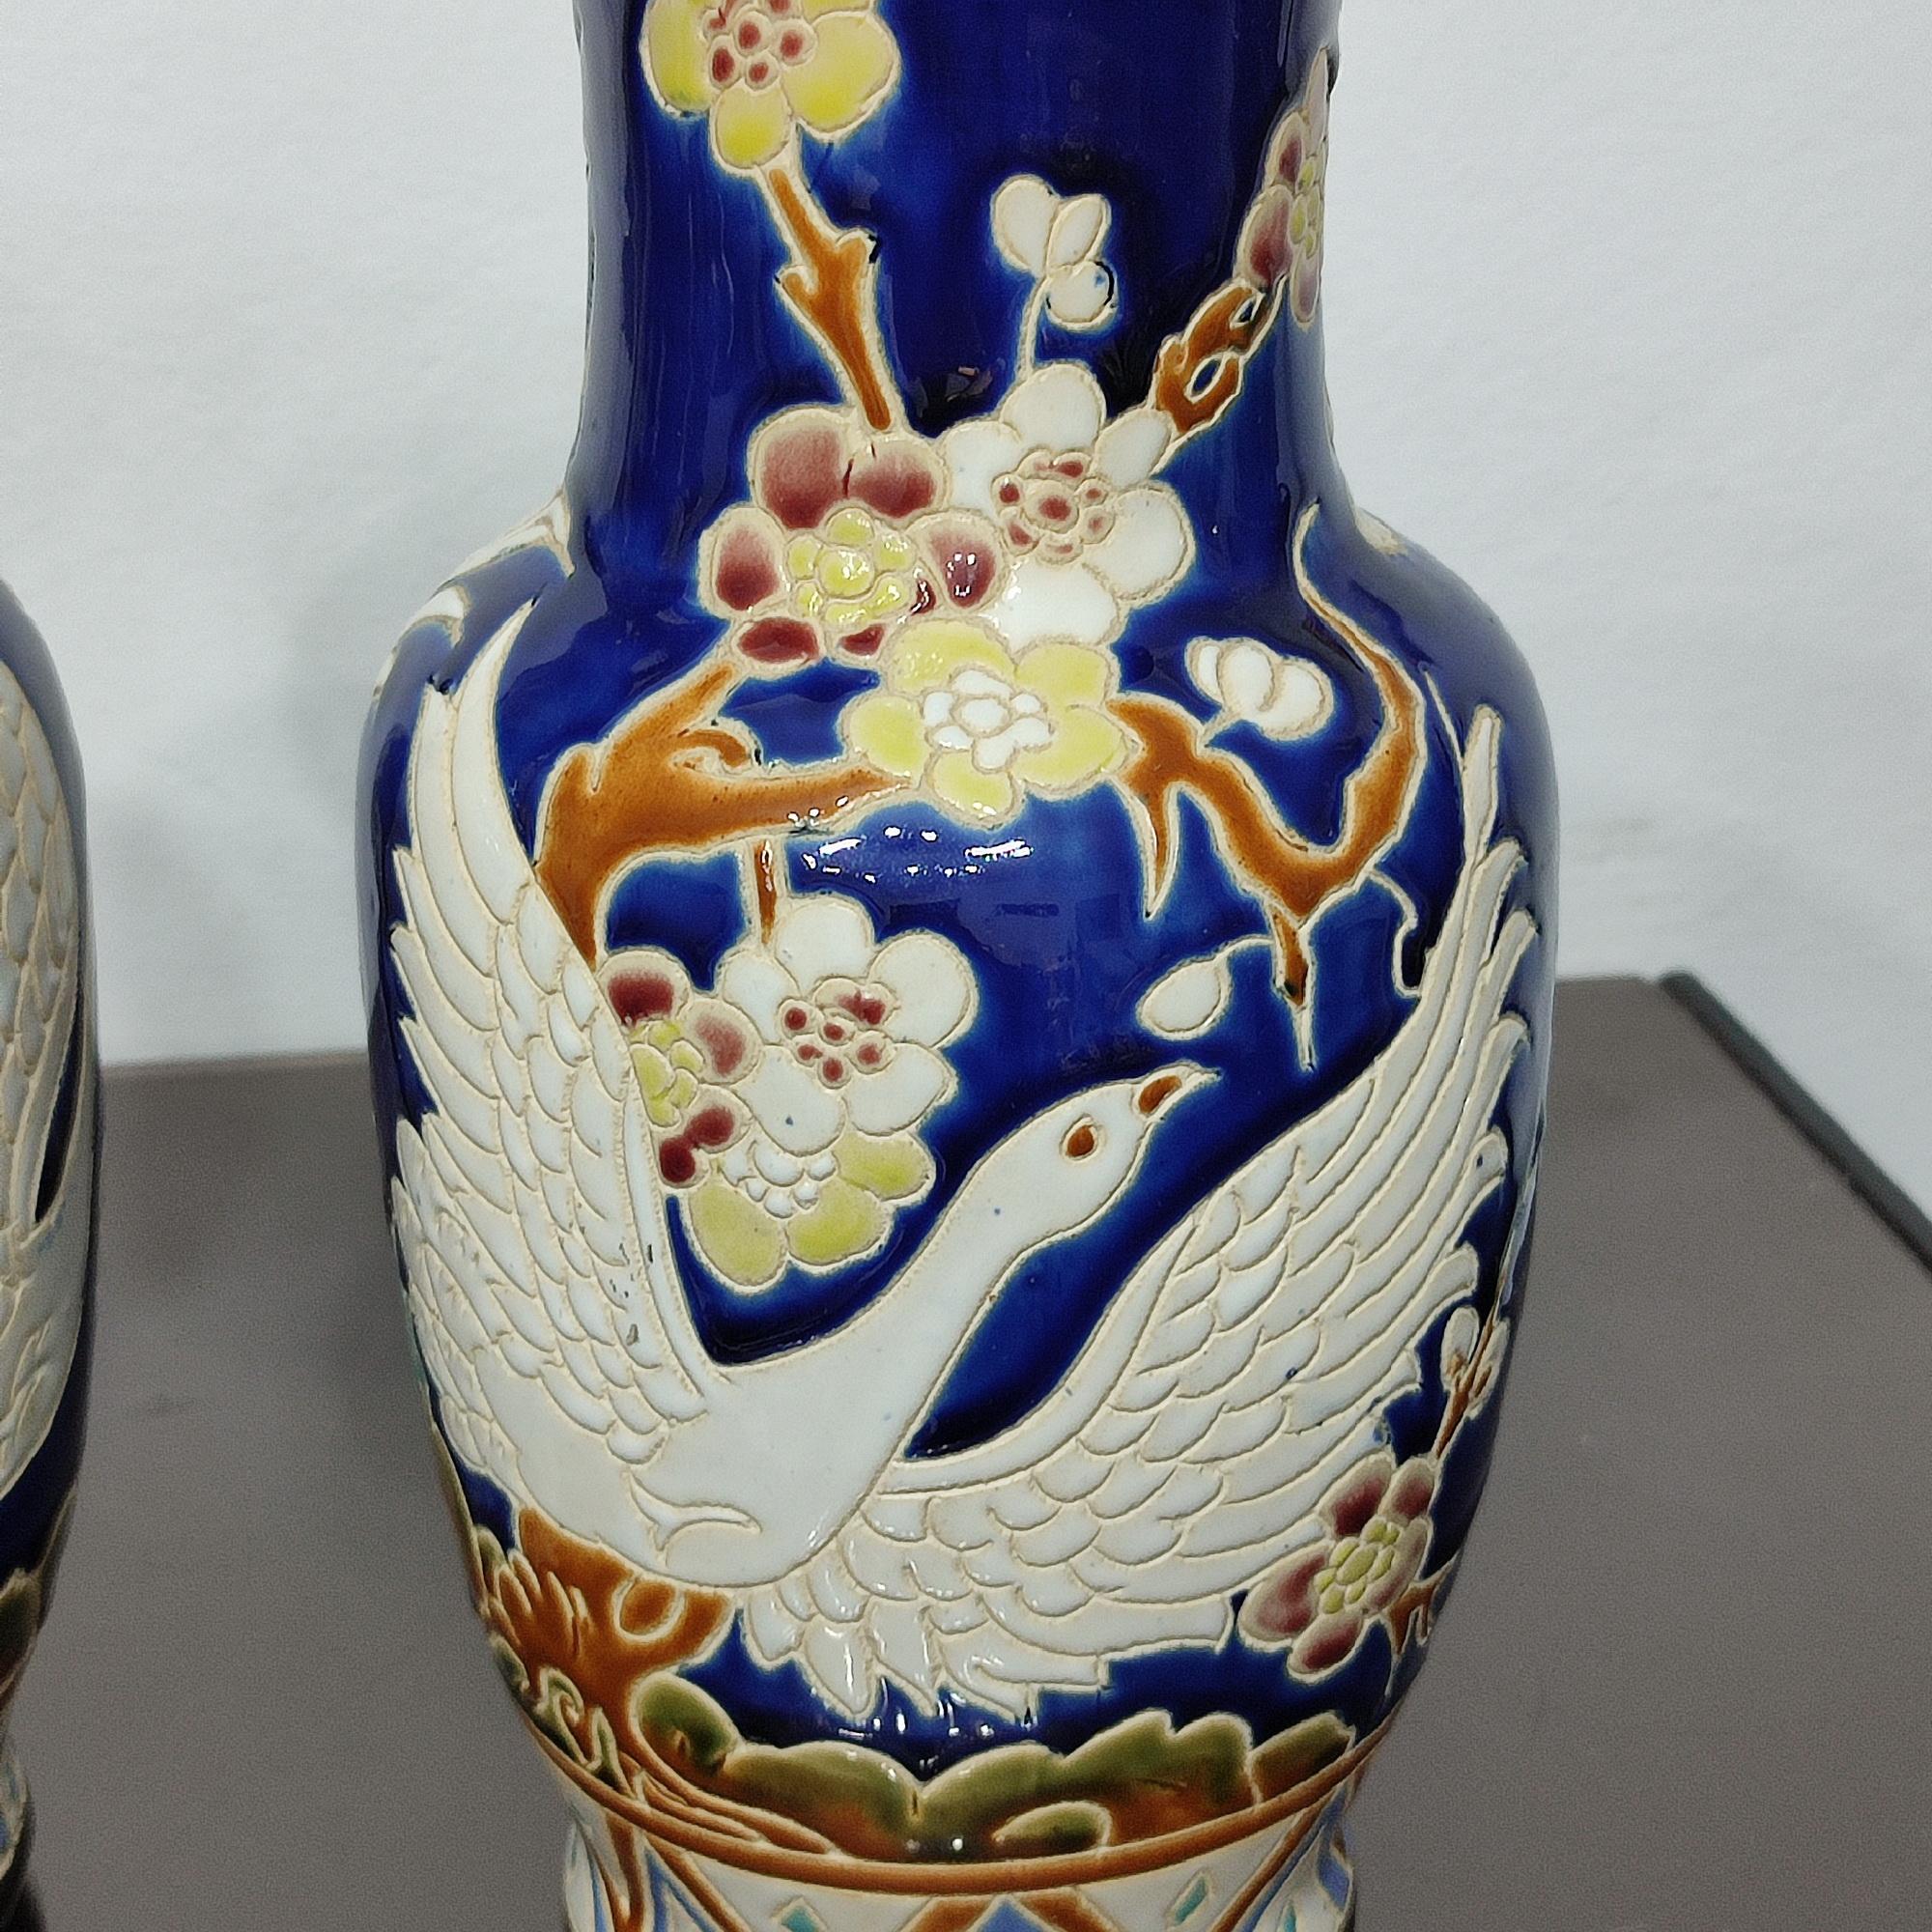 Pair of Ceramic Vases with Wonderful Flying Swans and Cherry Flowers Decor 3